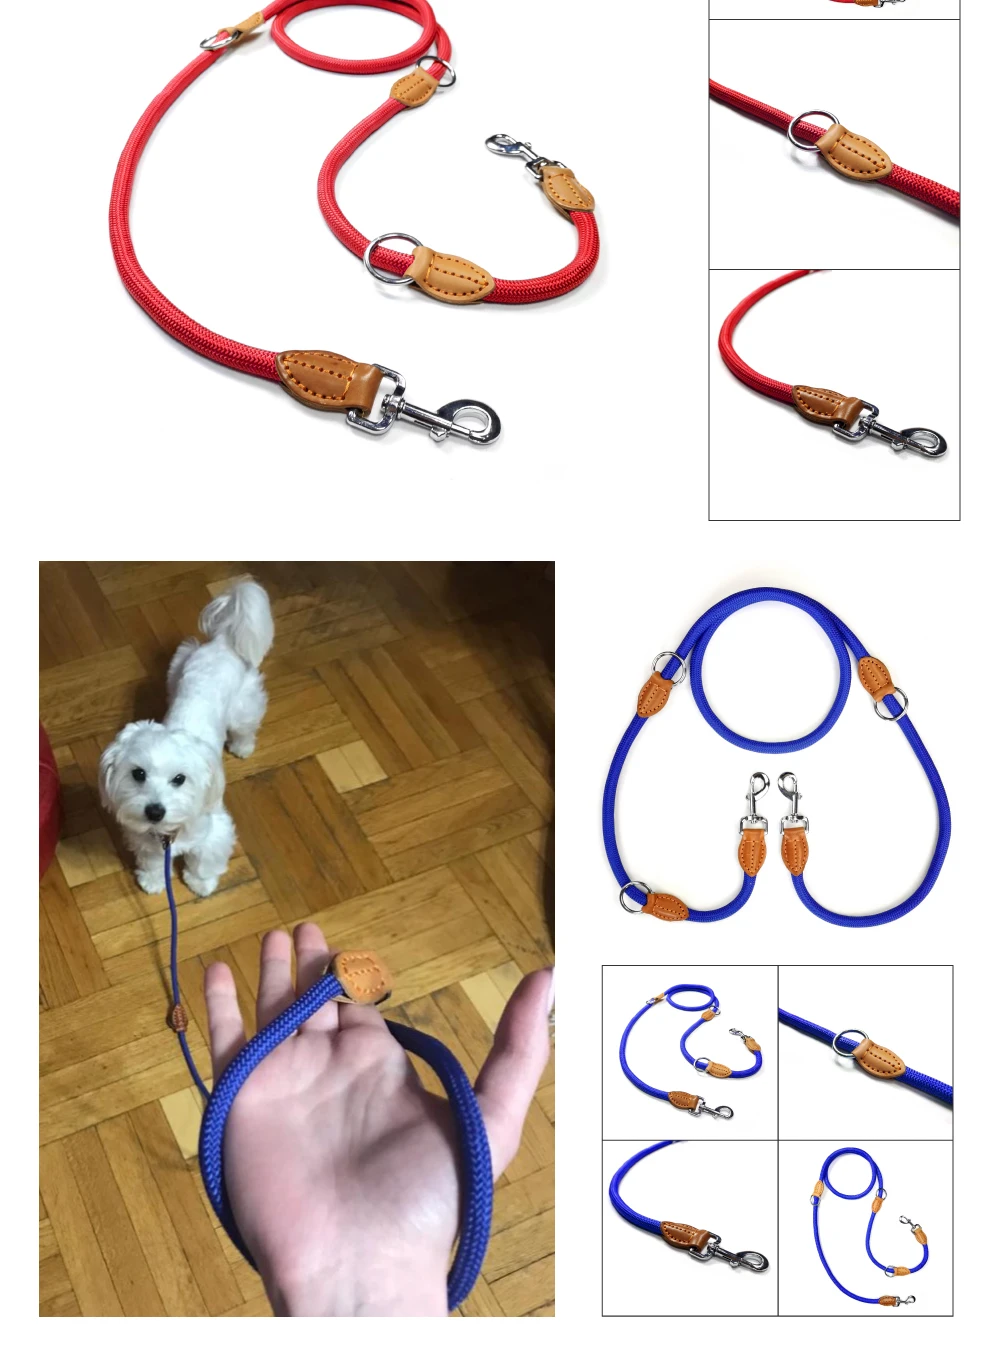 Multifunction Double Leash P chain Collar Two Dog Leashes Nylon Adjustable Long Short Dog Training Leads Tied Dog Supplies light up dog collar